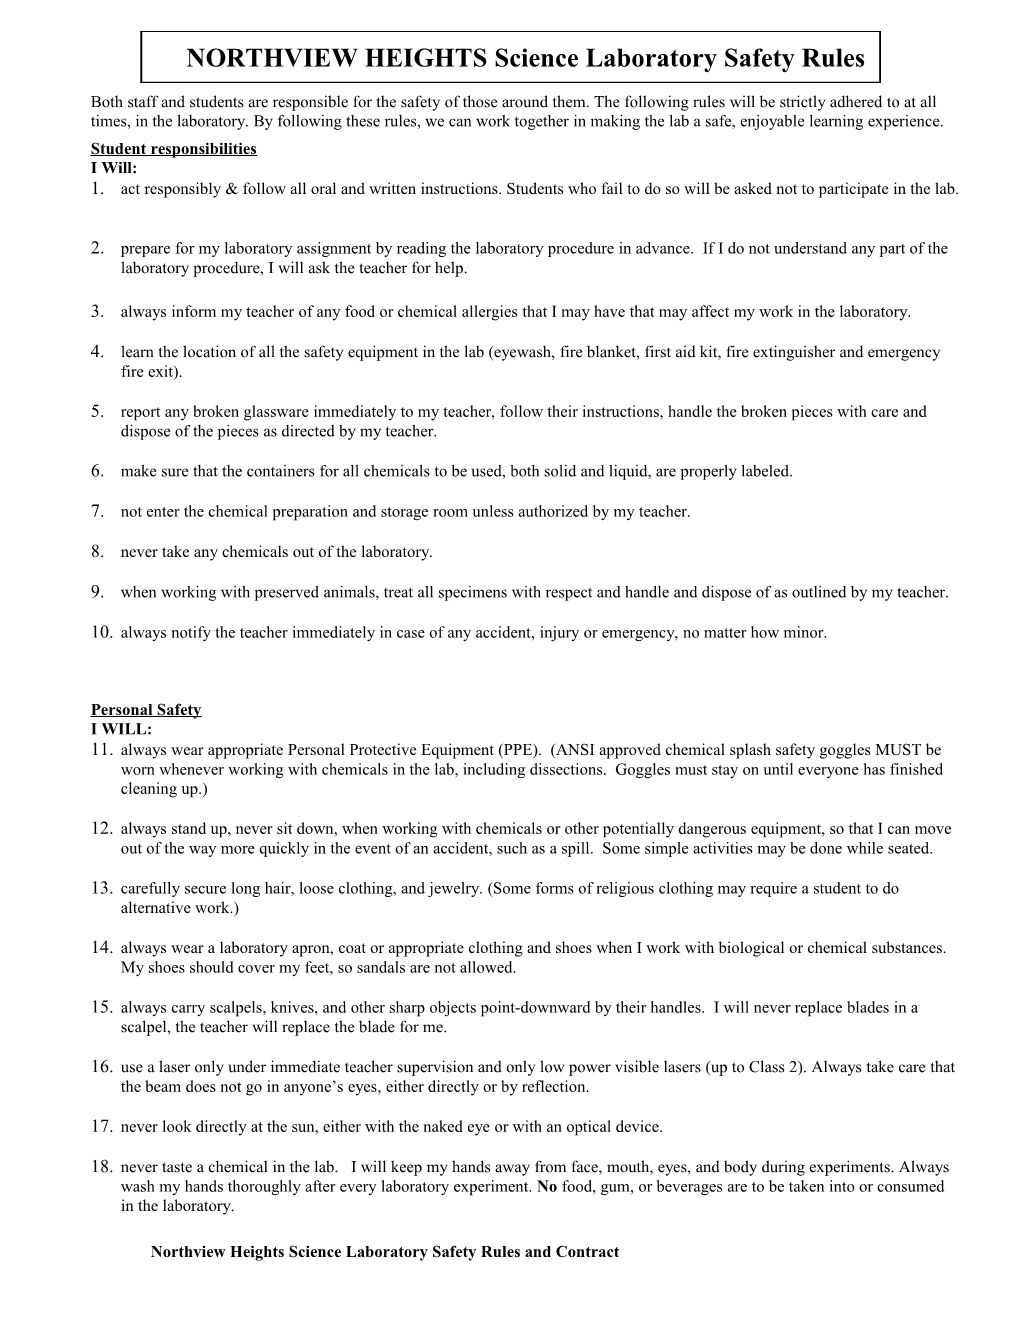 SAMPLE Science Laboratory Safety Rules